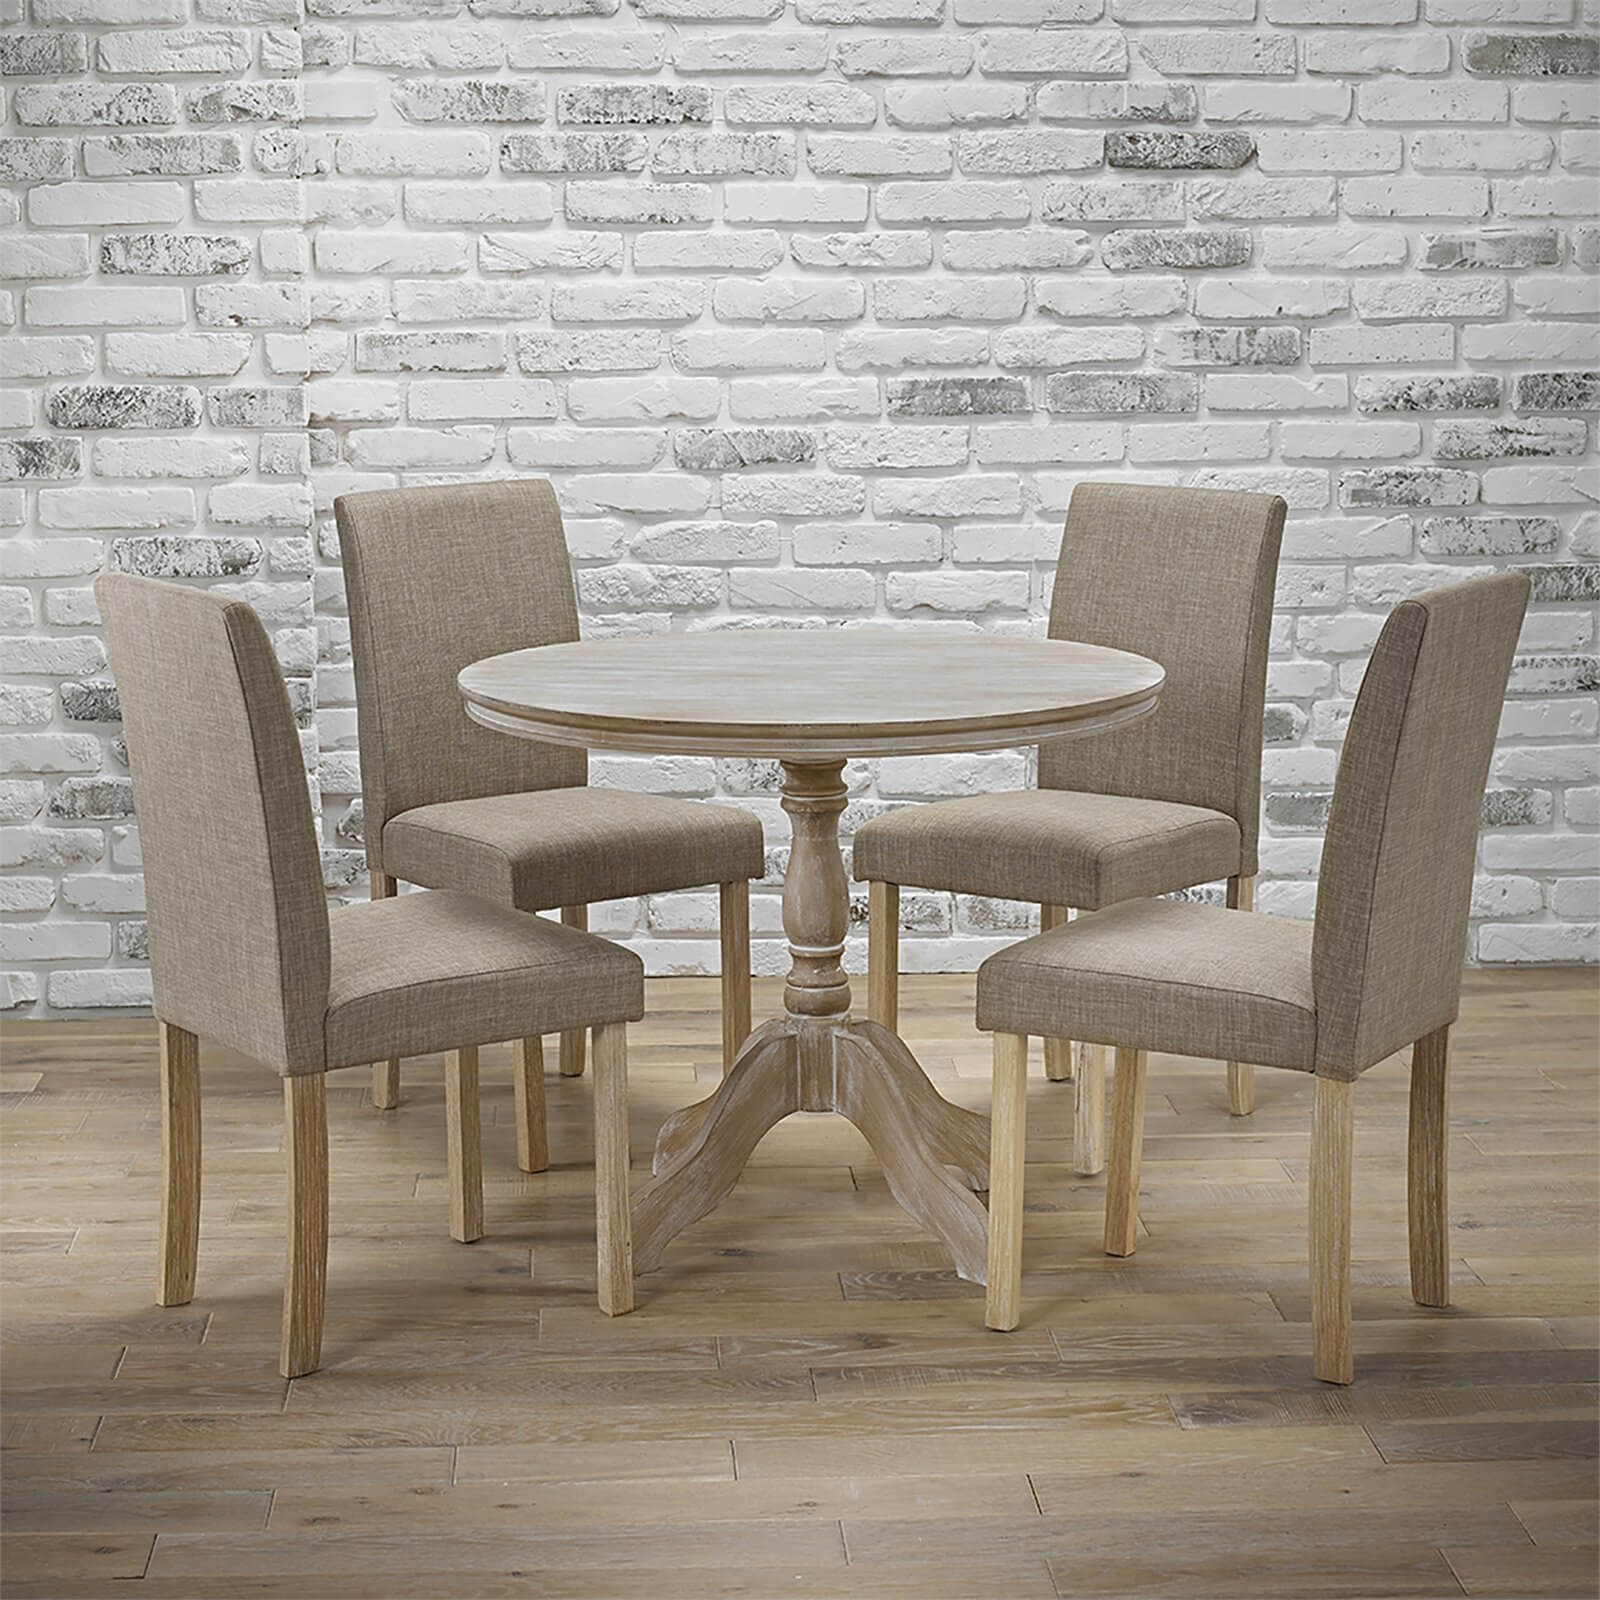 Provence 4 Seater Dining Set - Melodie Dining Chairs - Beige